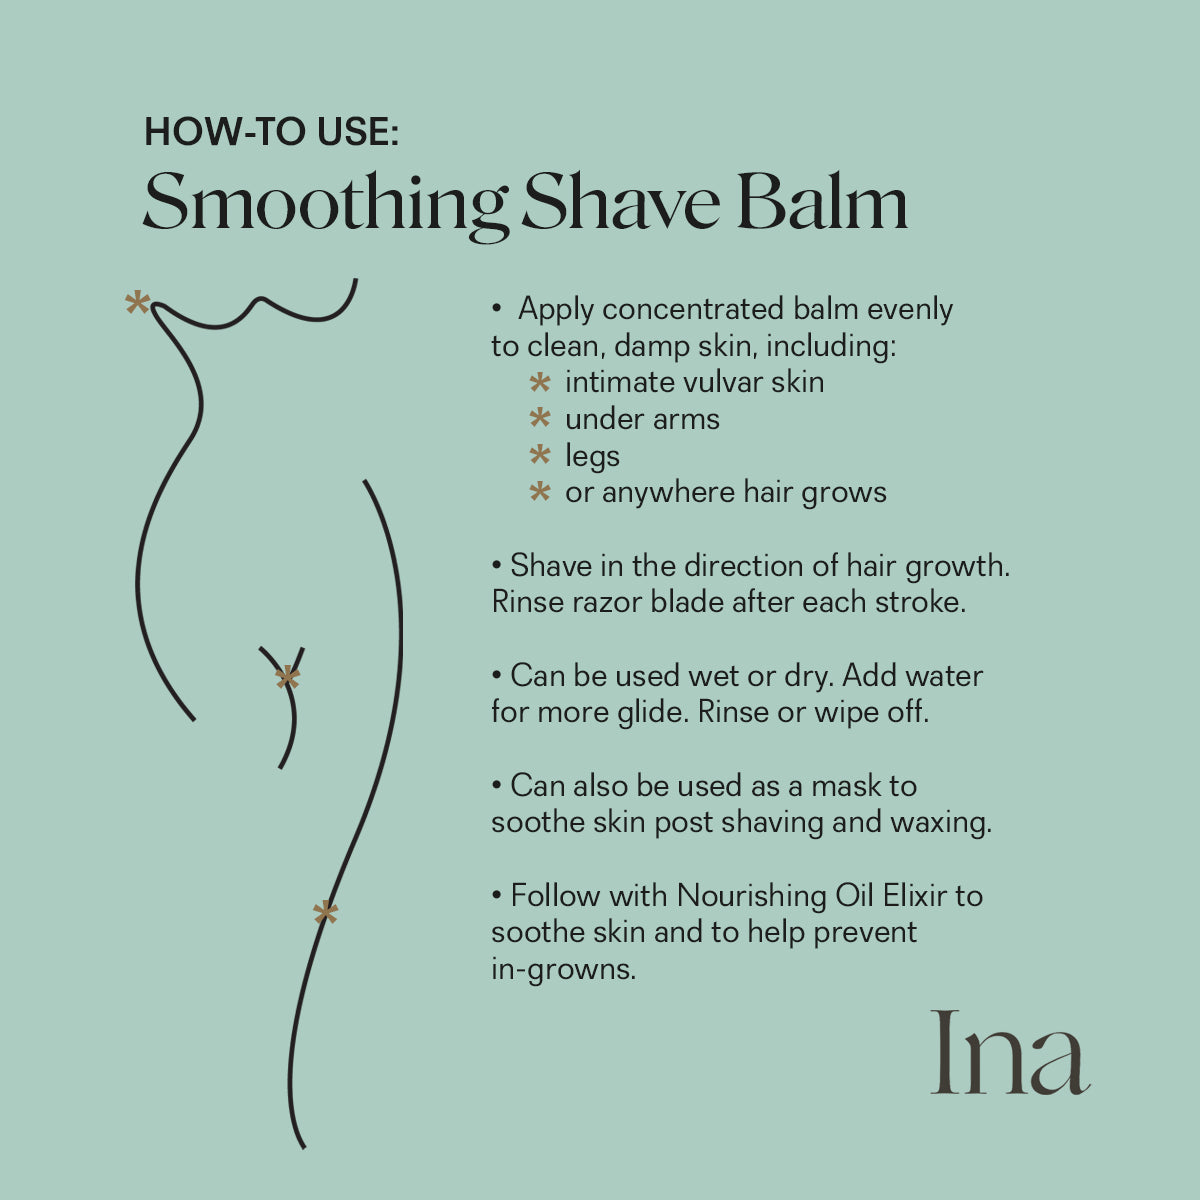 Smoothing Shave Balm